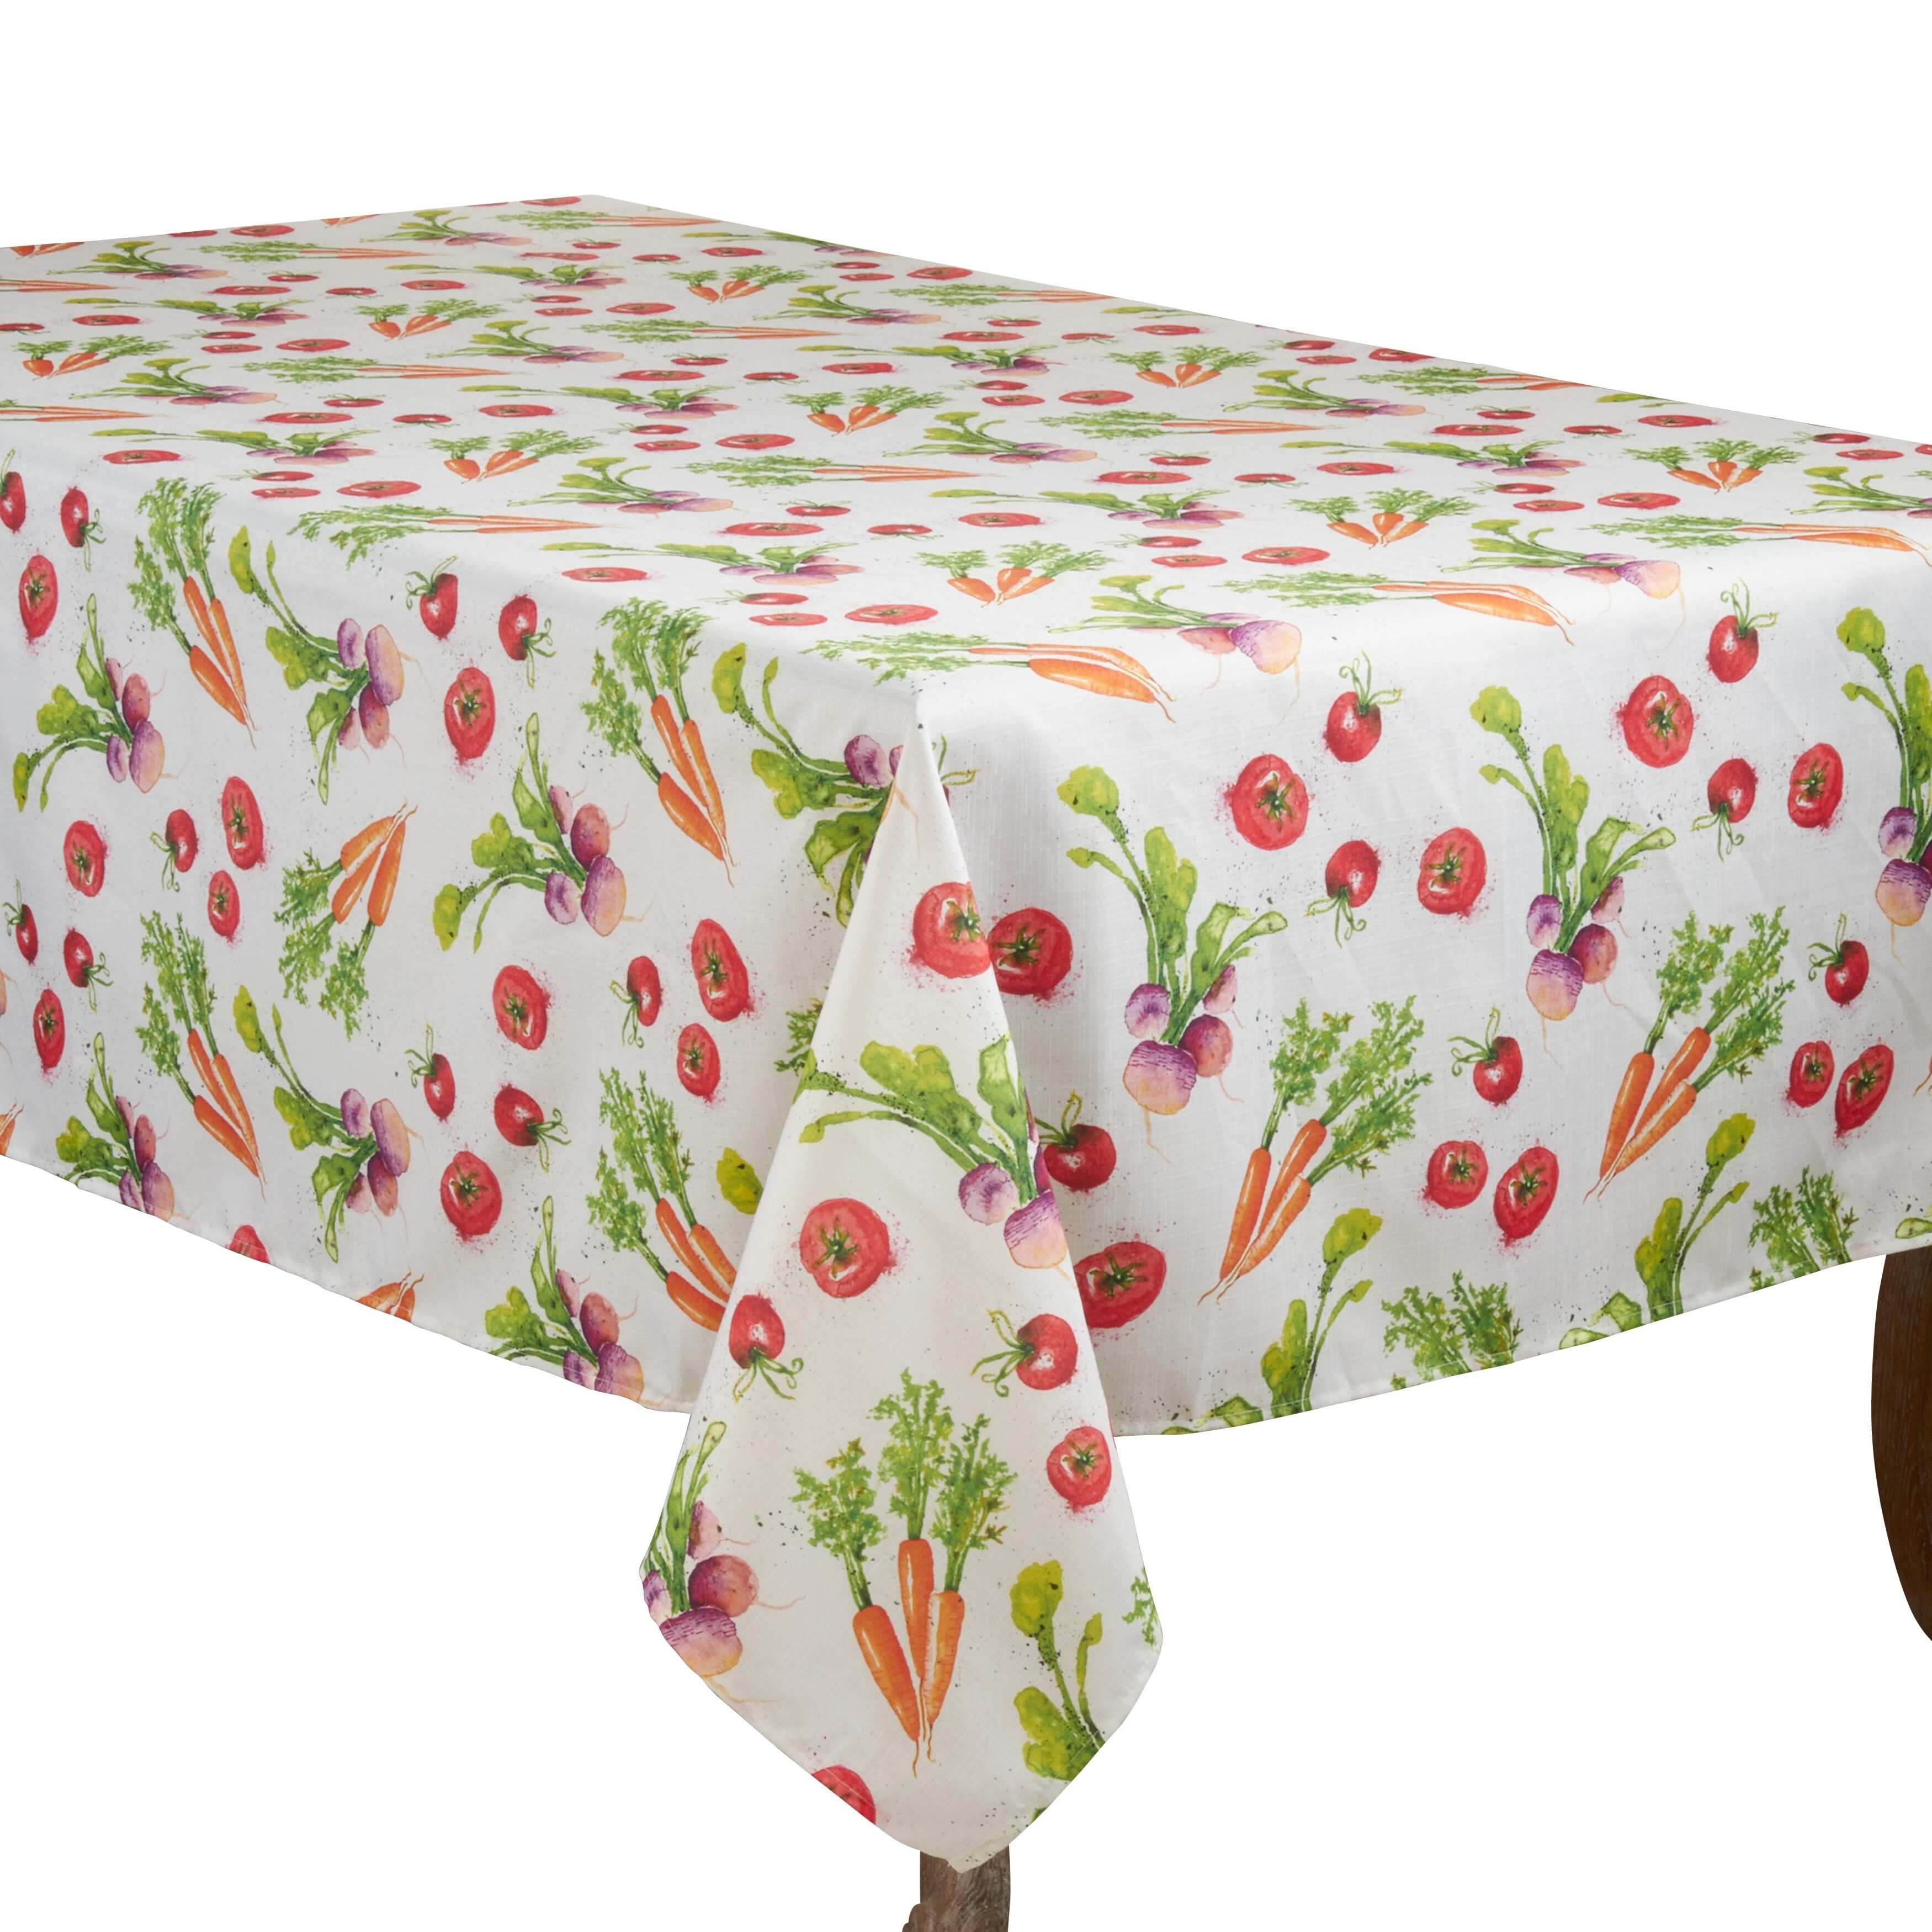 Casual Tablecloth with Veggies Design